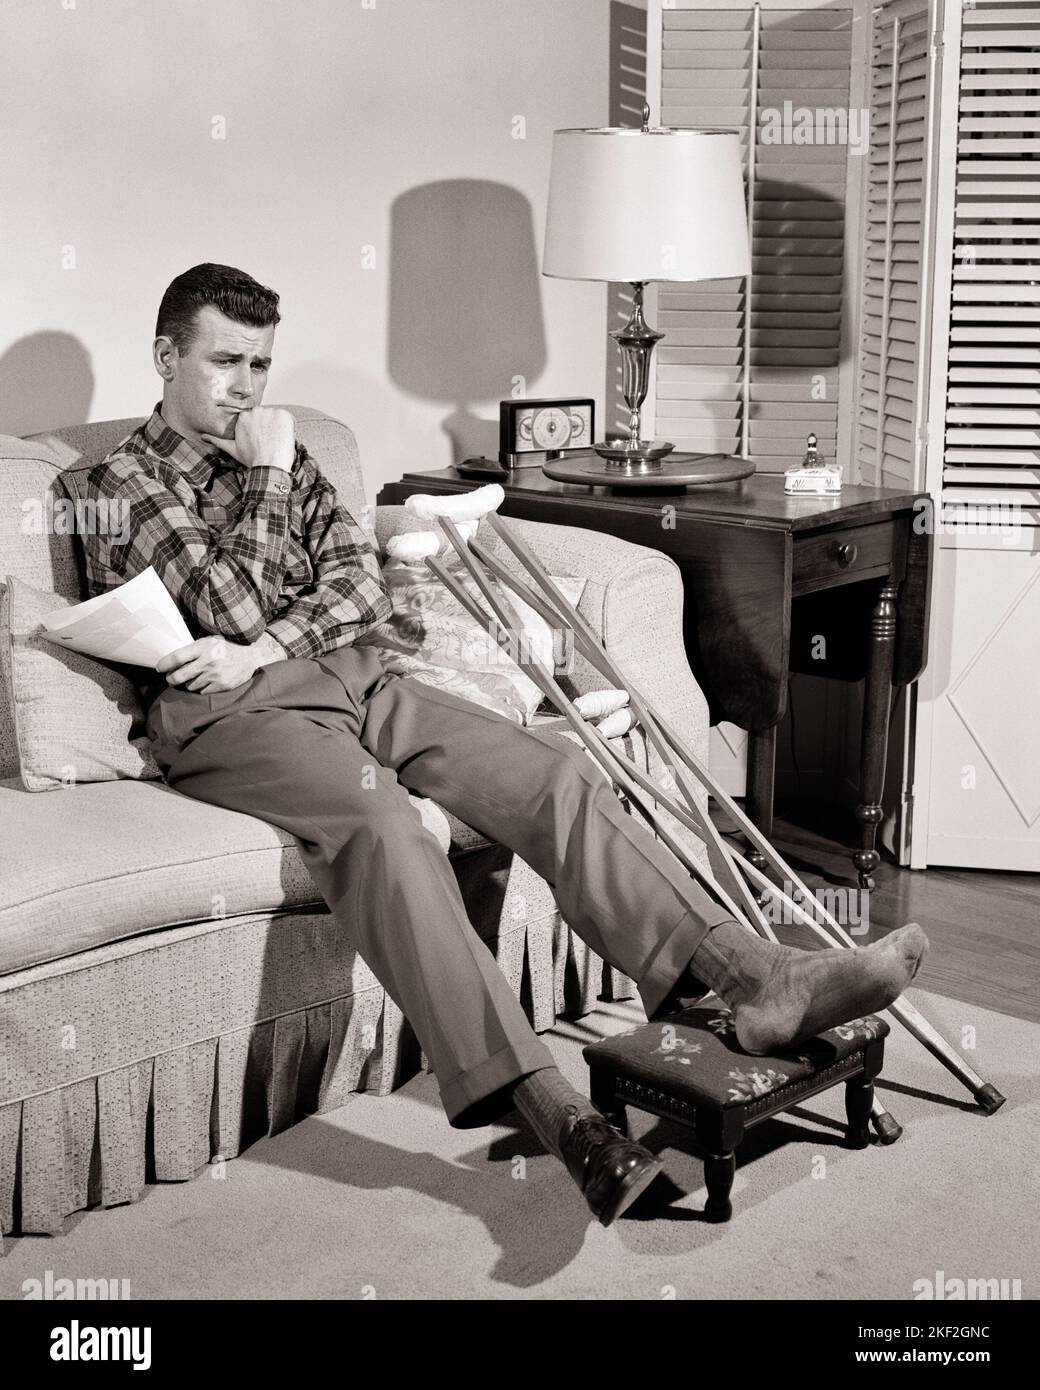 1950s WORRIED MAN HOLDING HANDFUL OF BILLS WHILE SITTING ON LIVING ROOM SOFA WITH CRUTCHES AND HIS INJURED FOOT UP ON A STOOL - s4373 HAR001 HARS ILLNESS HOME LIFE COPY SPACE FULL-LENGTH PERSONS MALES RISK TROUBLED B&W CONCERNED SADNESS HEALTHCARE DISASTER PREVENTION HIGH ANGLE HIS HEALING STRATEGY ACCIDENTAL AND DIAGNOSIS PRIDE HEALTH CARE UP IMPAIRMENT MOOD TREATMENT ACCIDENTS GLUM MISHAP CATASTROPHE HANDFUL MID-ADULT MID-ADULT MAN MISERABLE MISFORTUNE SOLUTIONS YOUNG ADULT MAN BLACK AND WHITE CAUCASIAN ETHNICITY DISEASE HAR001 INVOICES OLD FASHIONED Stock Photo